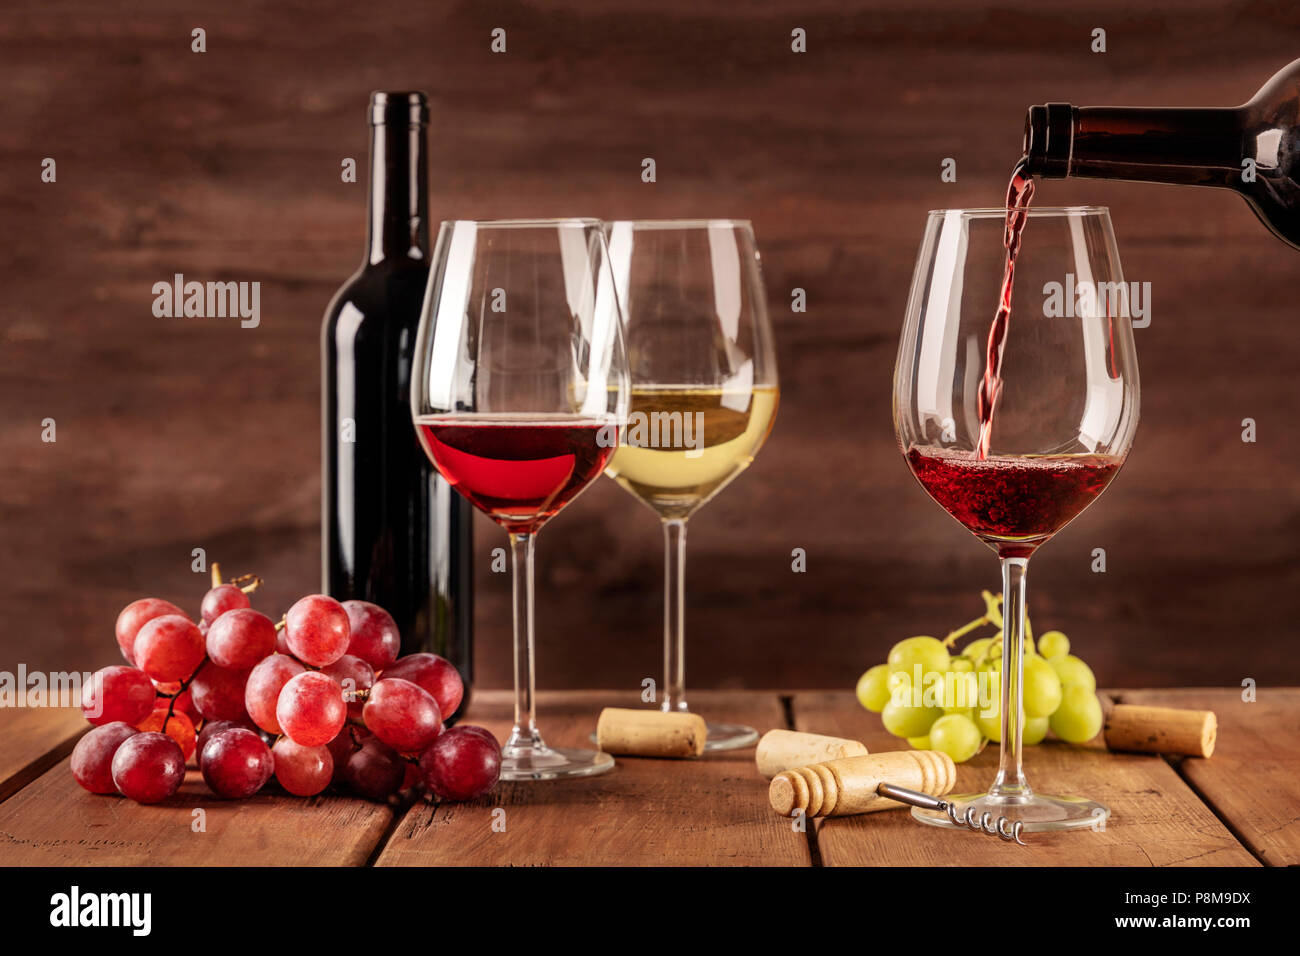 Red wine being poured into a glass from a bottle, on a dark background,  with copy space and other glasses and grapes in the blurred background.  Design Stock Photo - Alamy